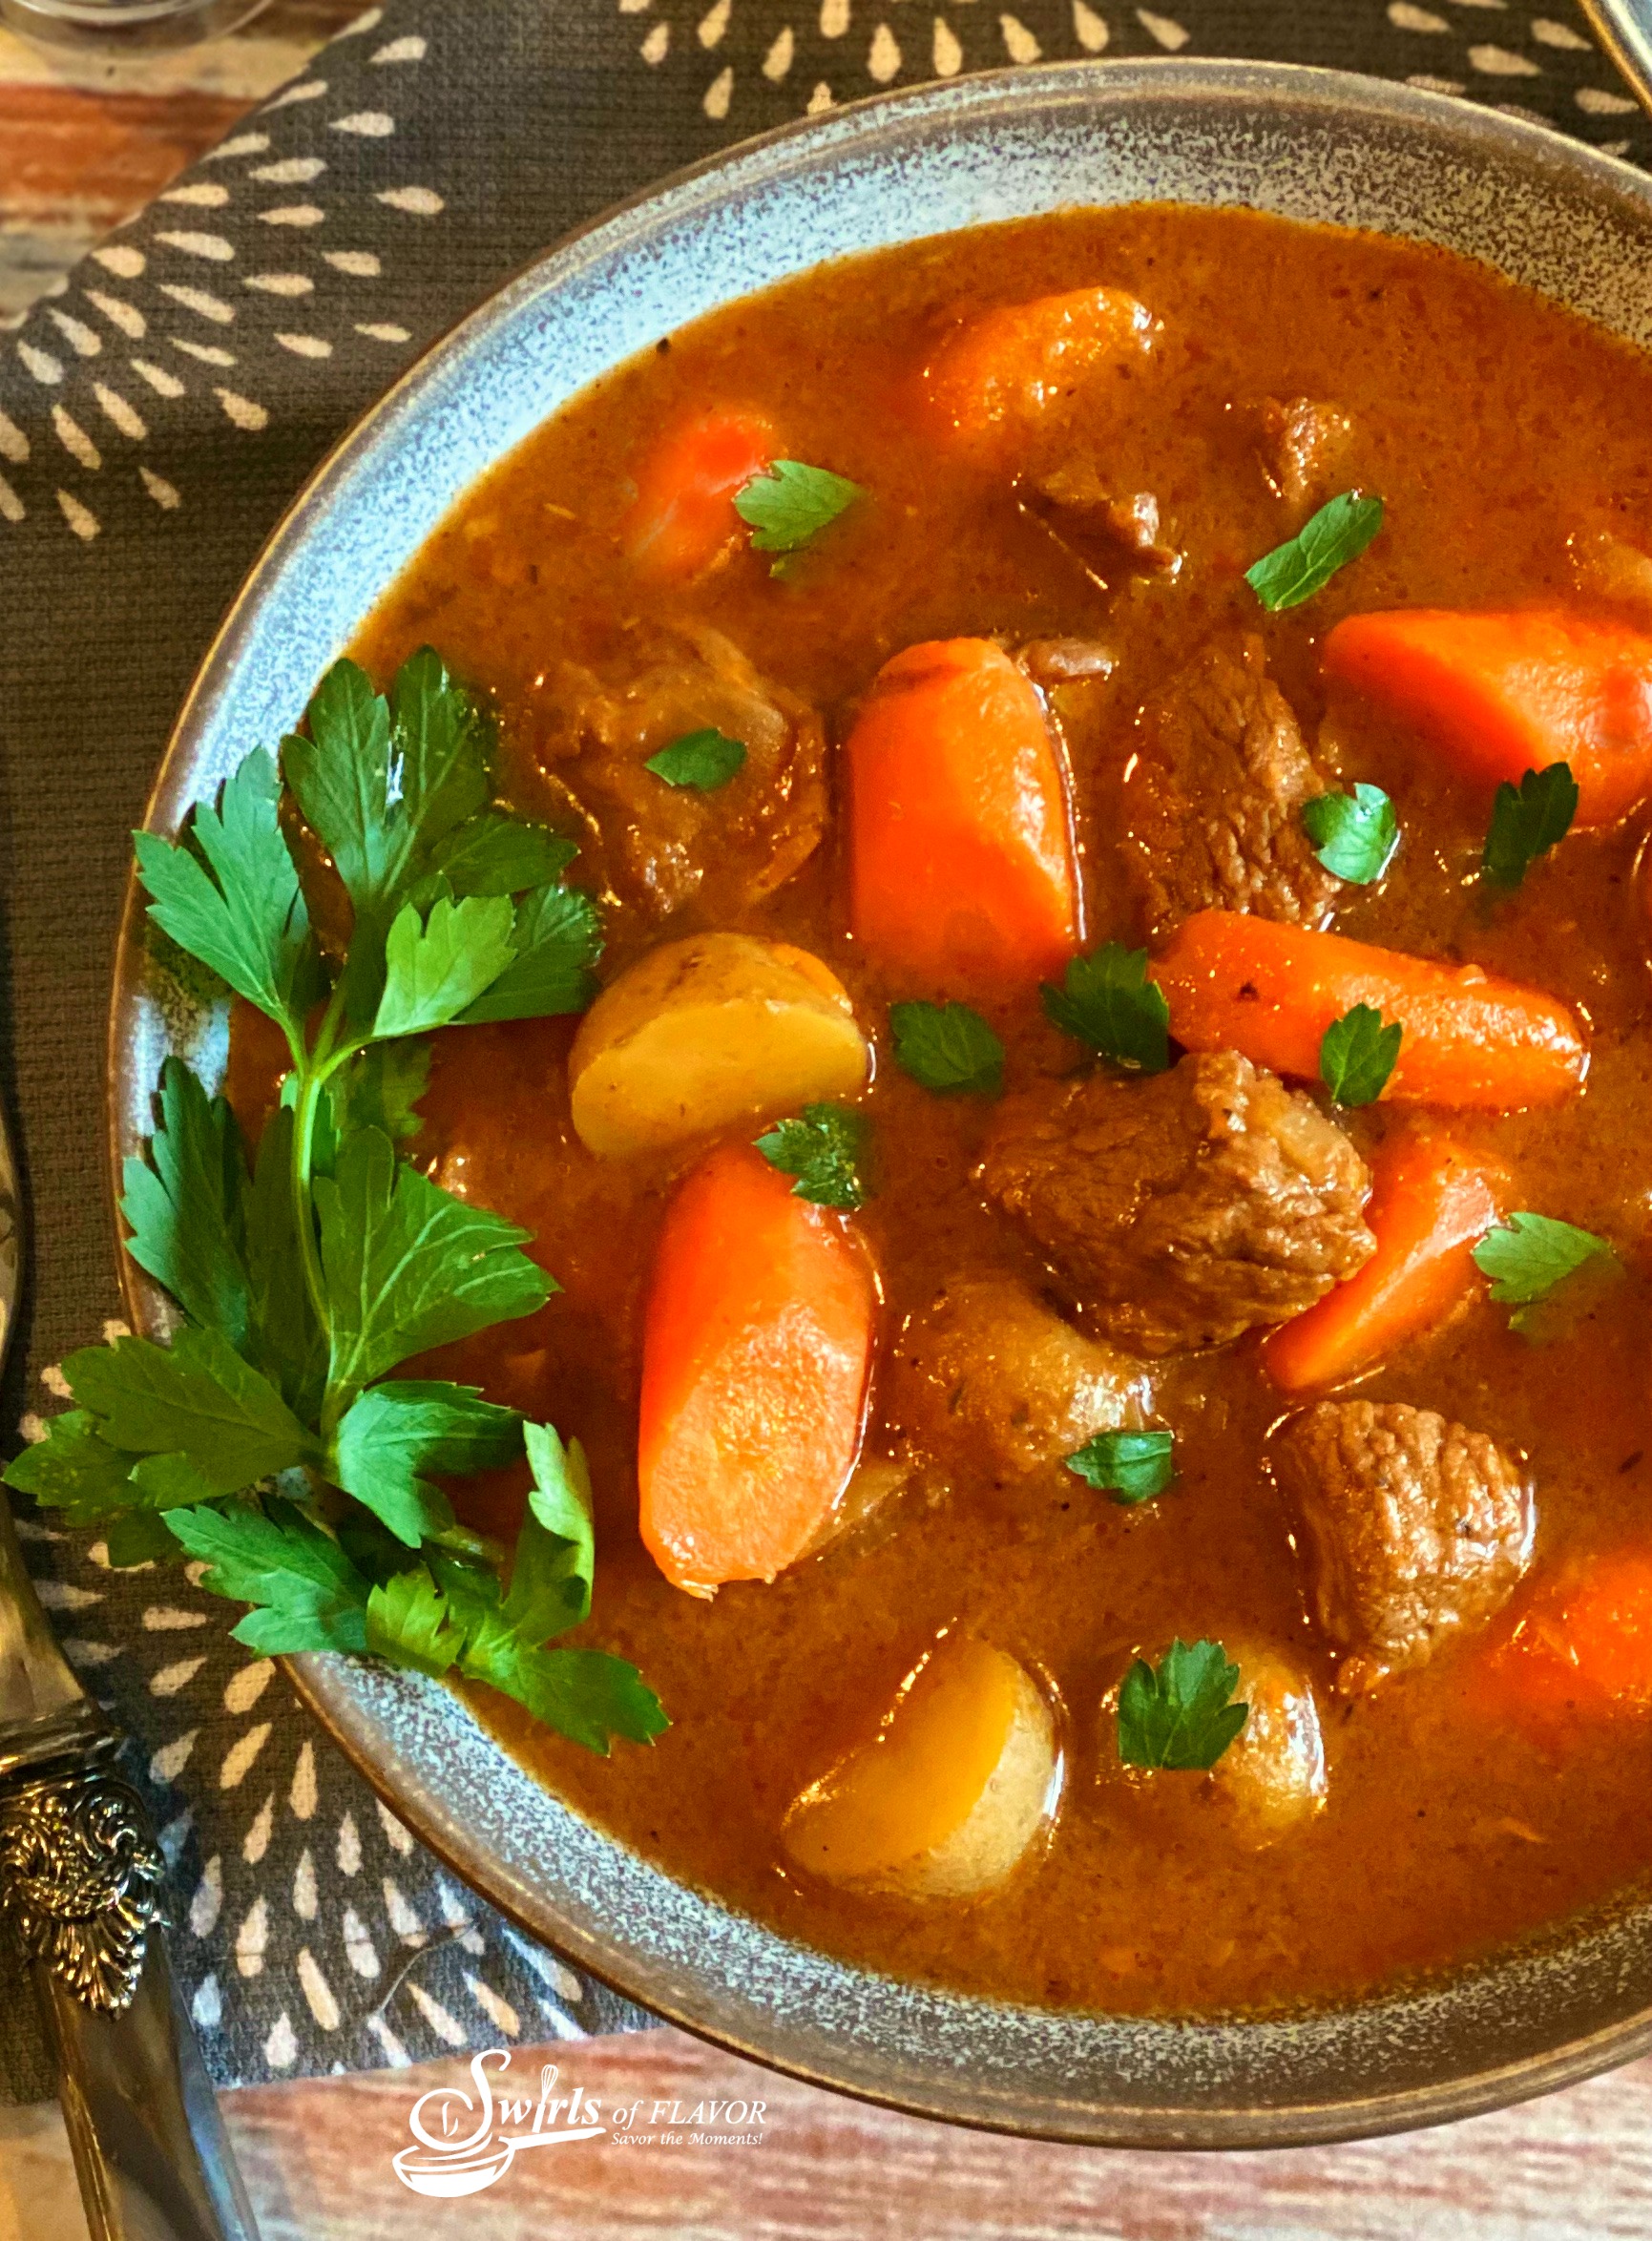 Irish Beef Stew With Guinness Recipe - Best Crafts and Recipes